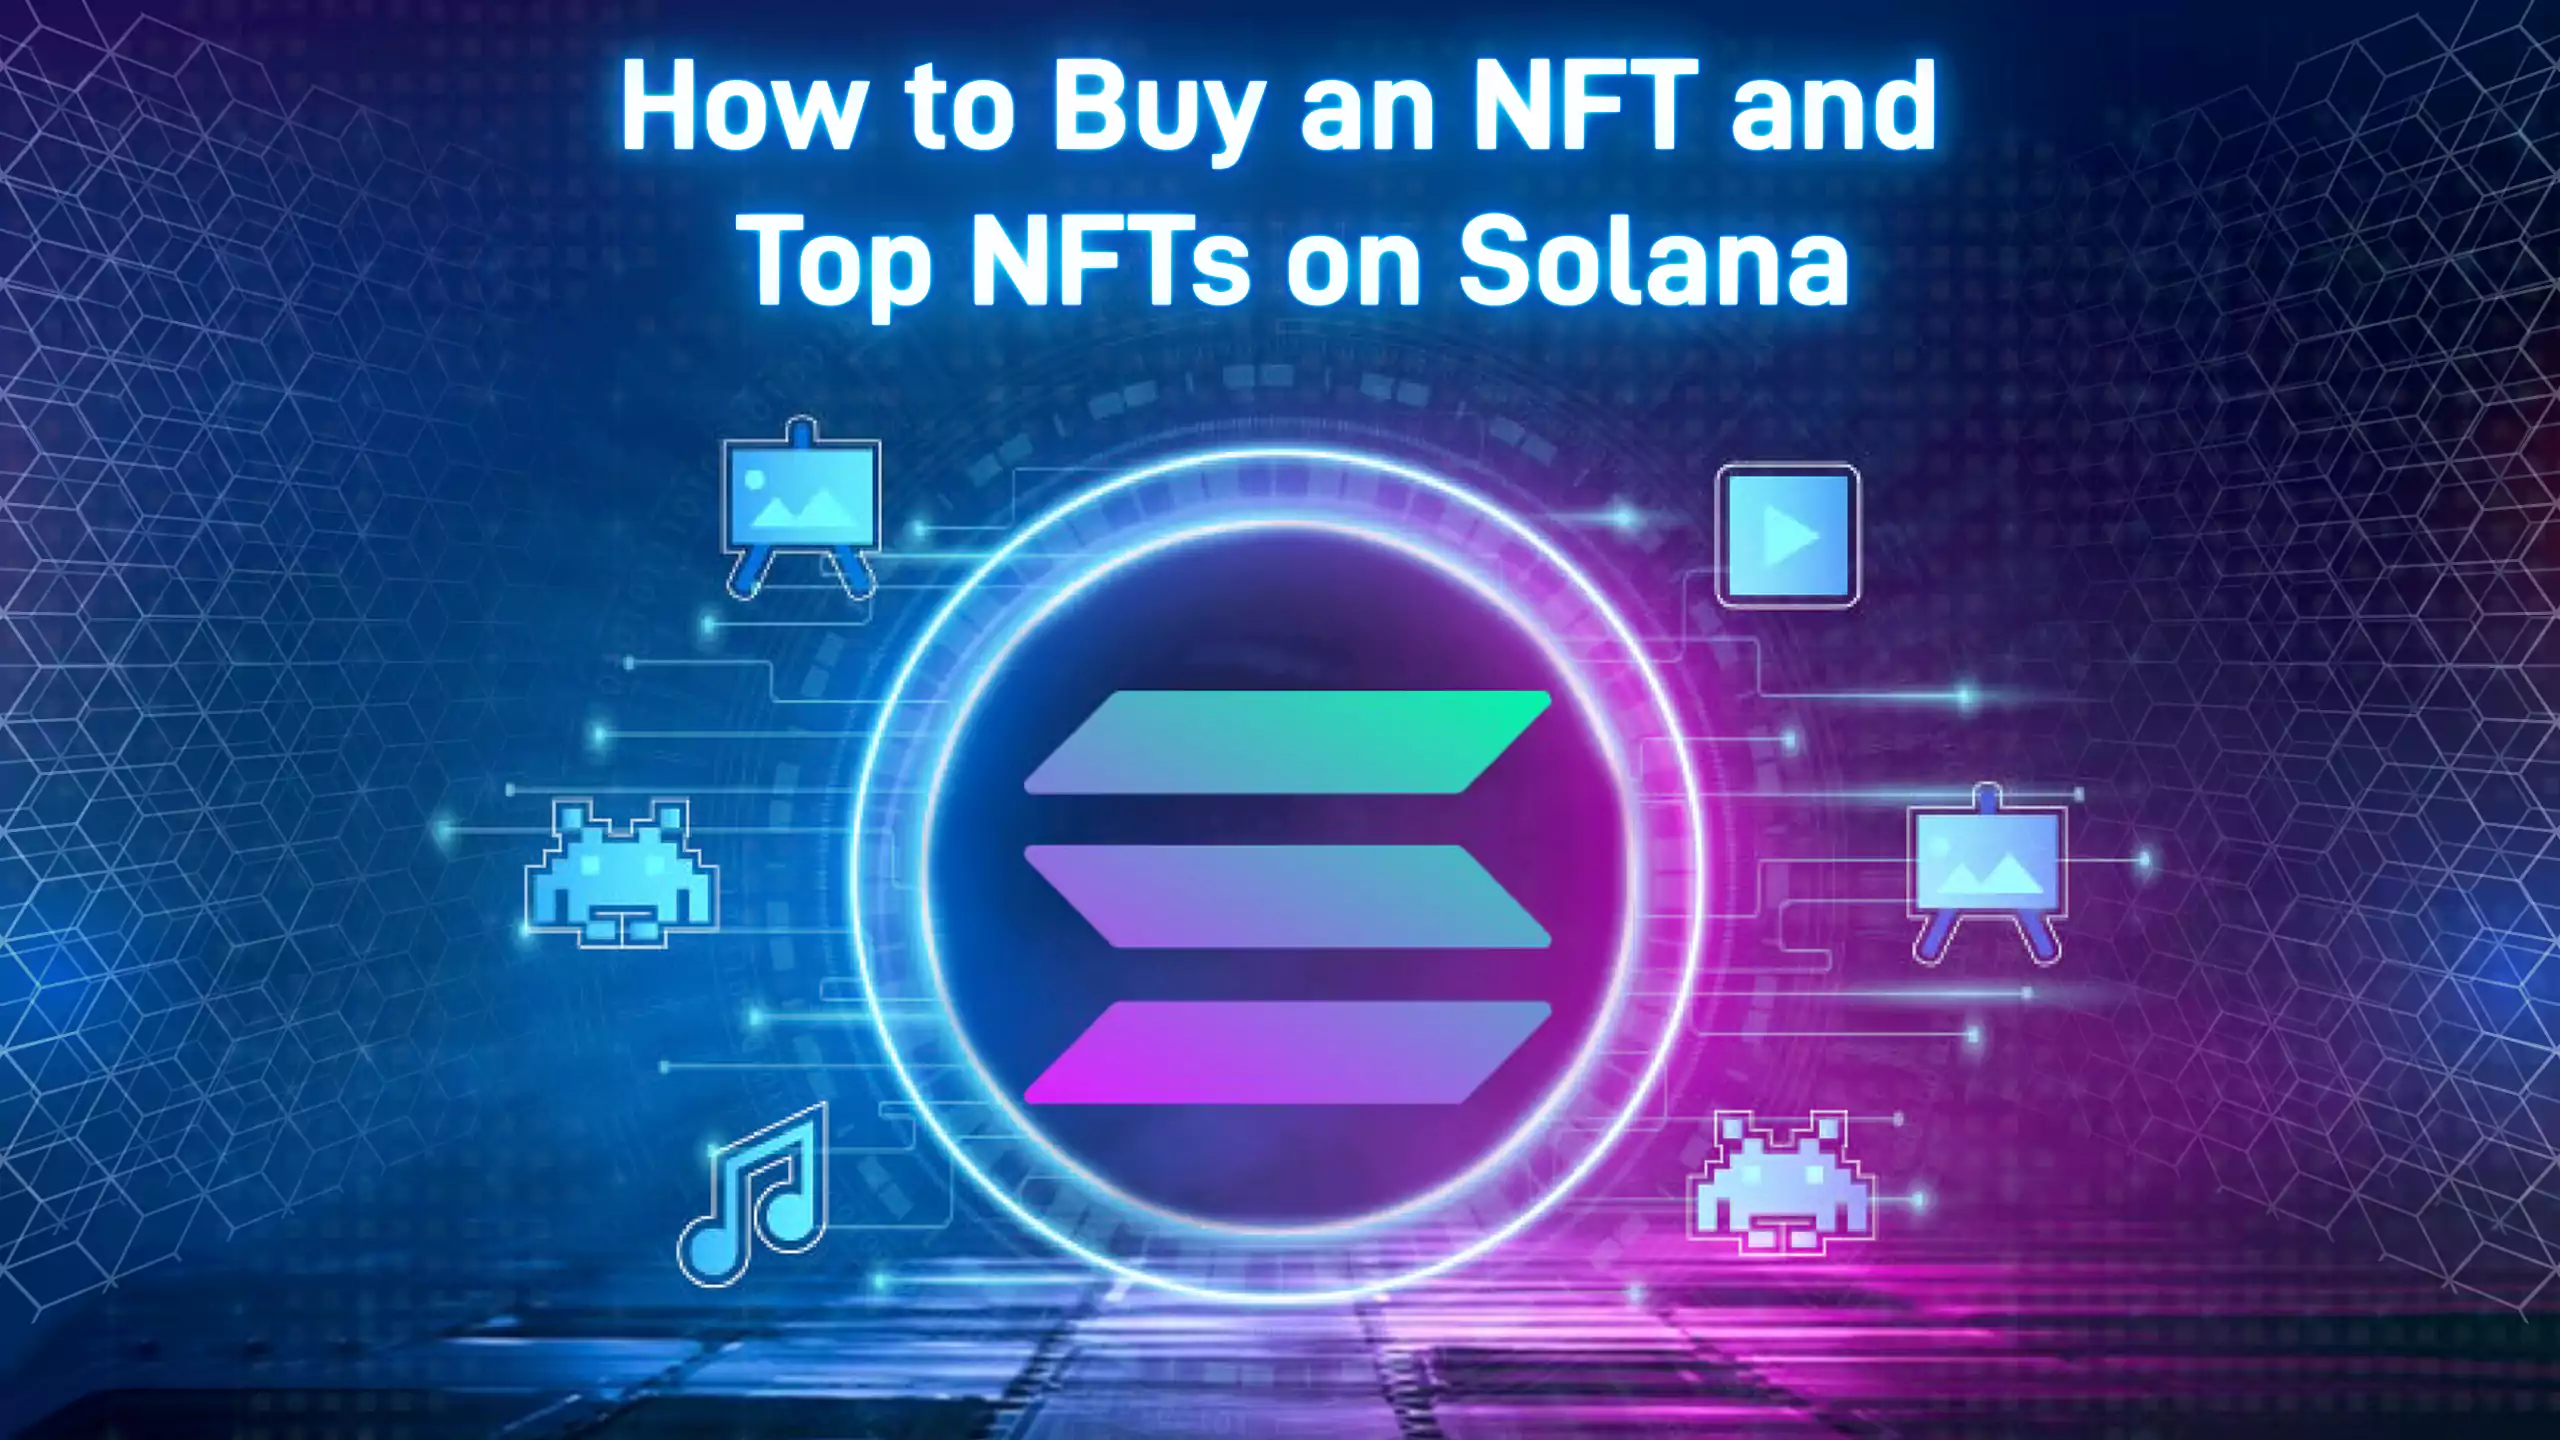 Solana: How to Buy an NFT and Top NFT Projects on the Blockchain